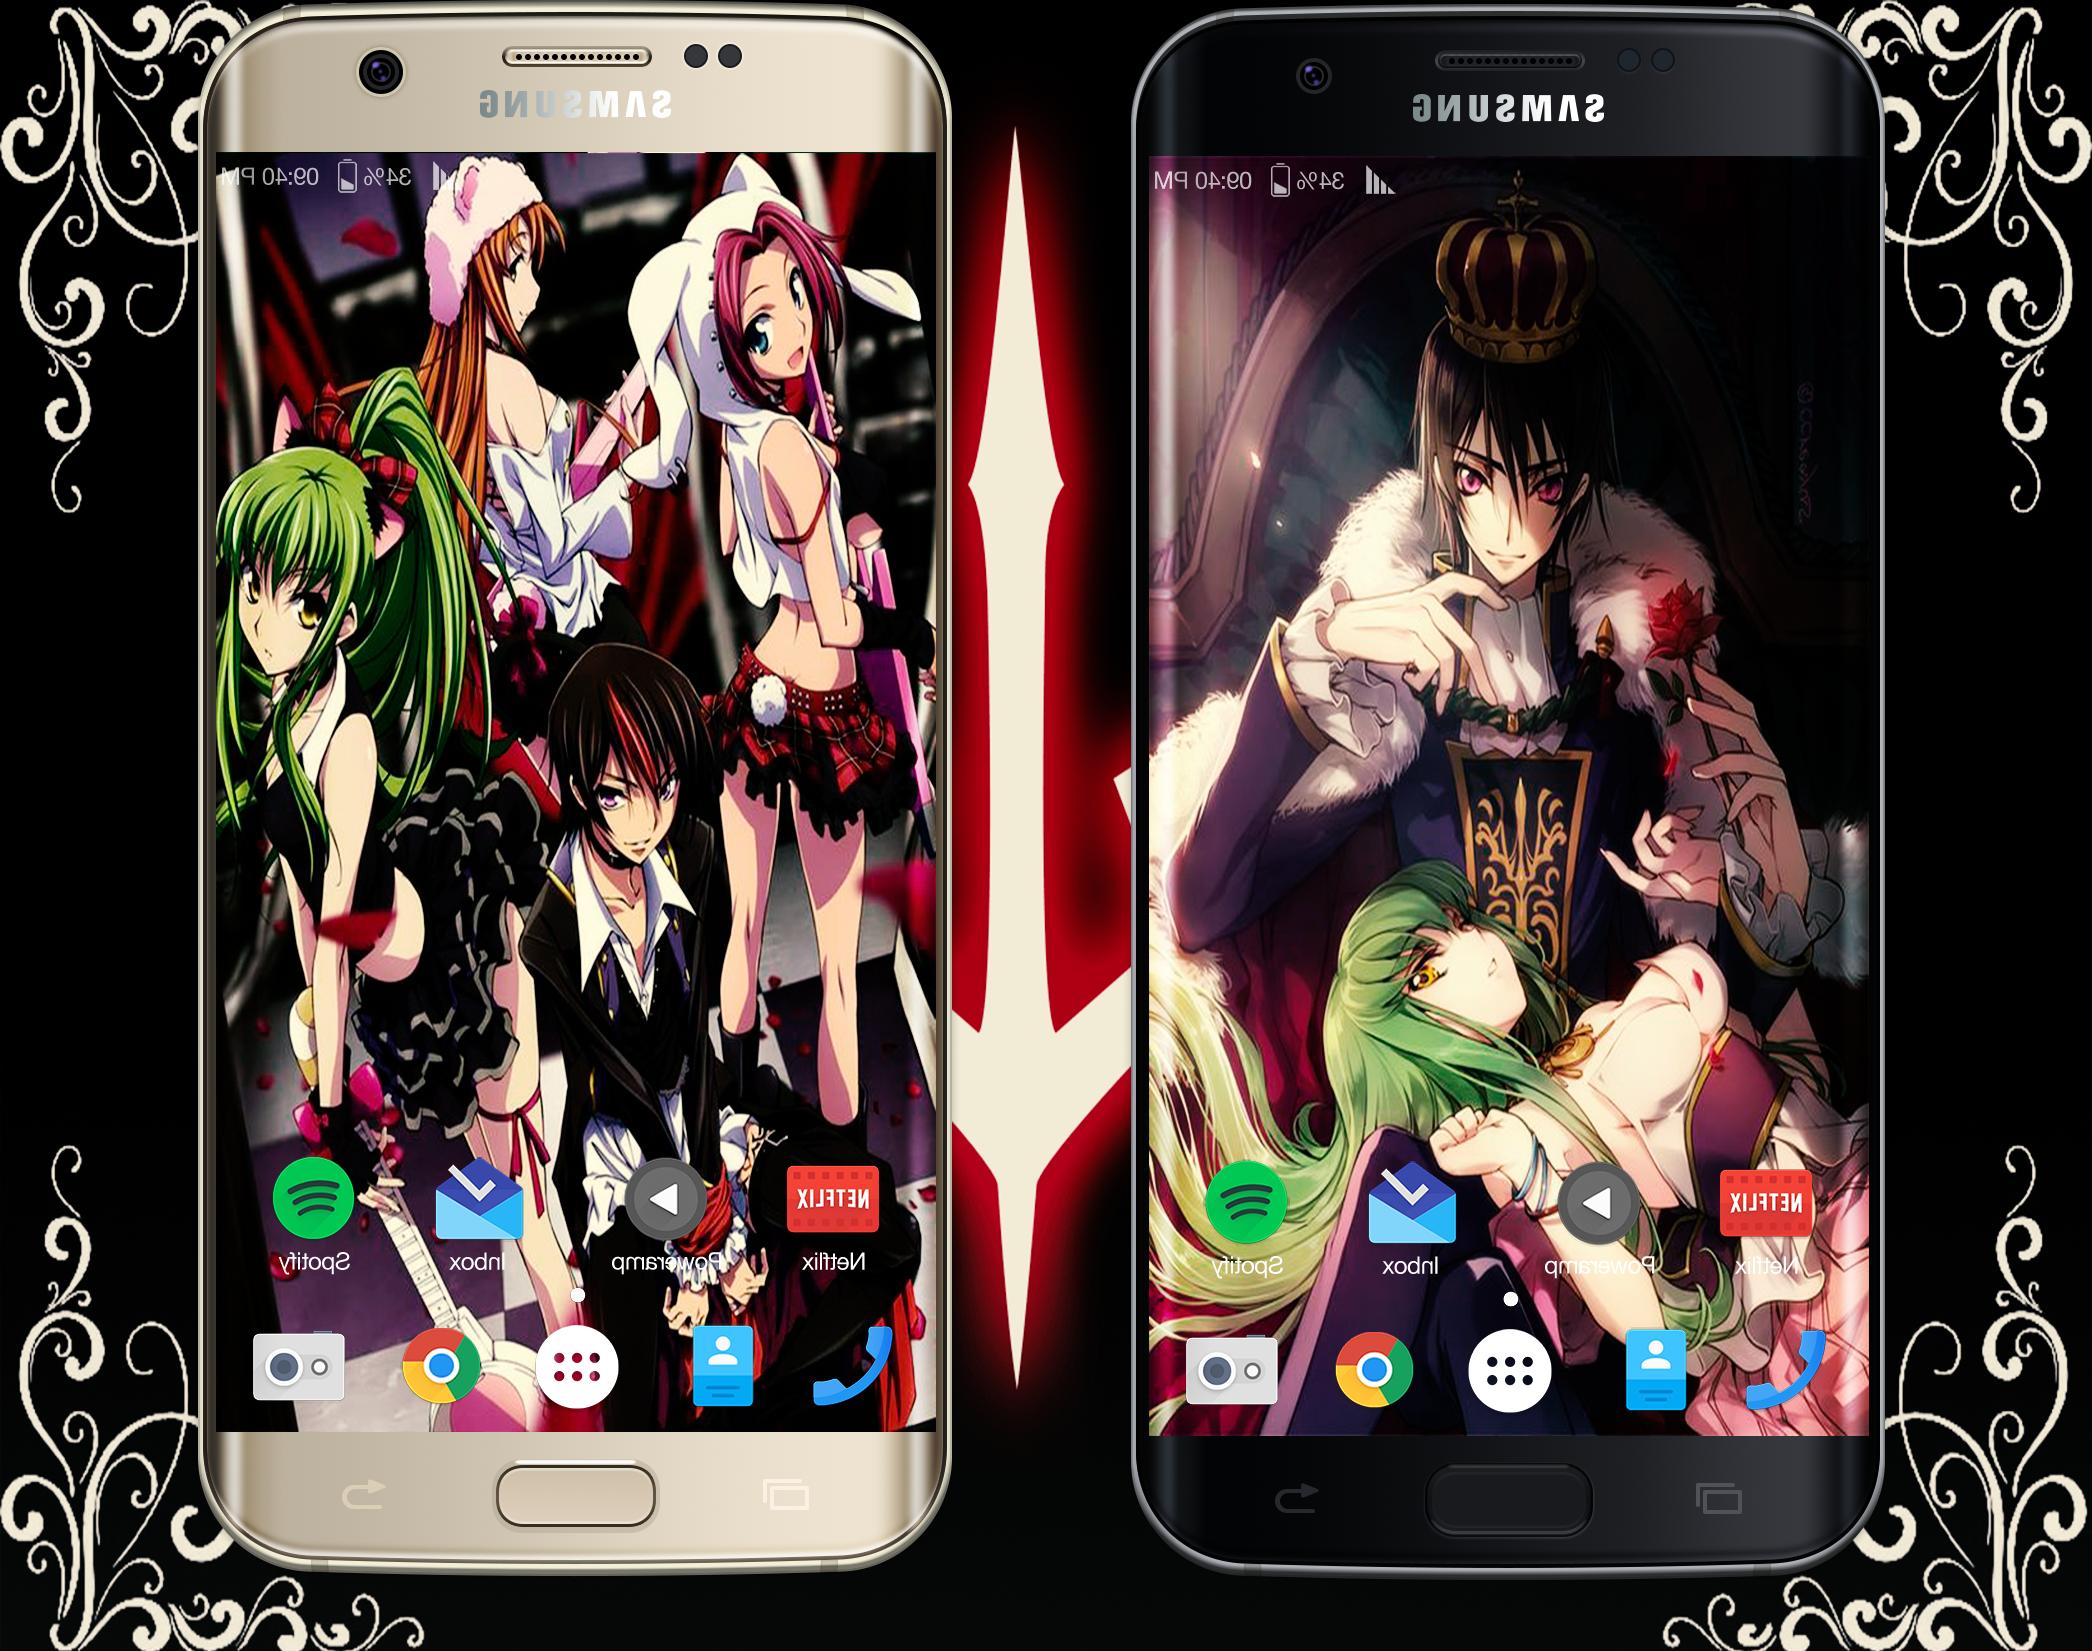 Art Code Geass Wallpapers Hd For Android Apk Download